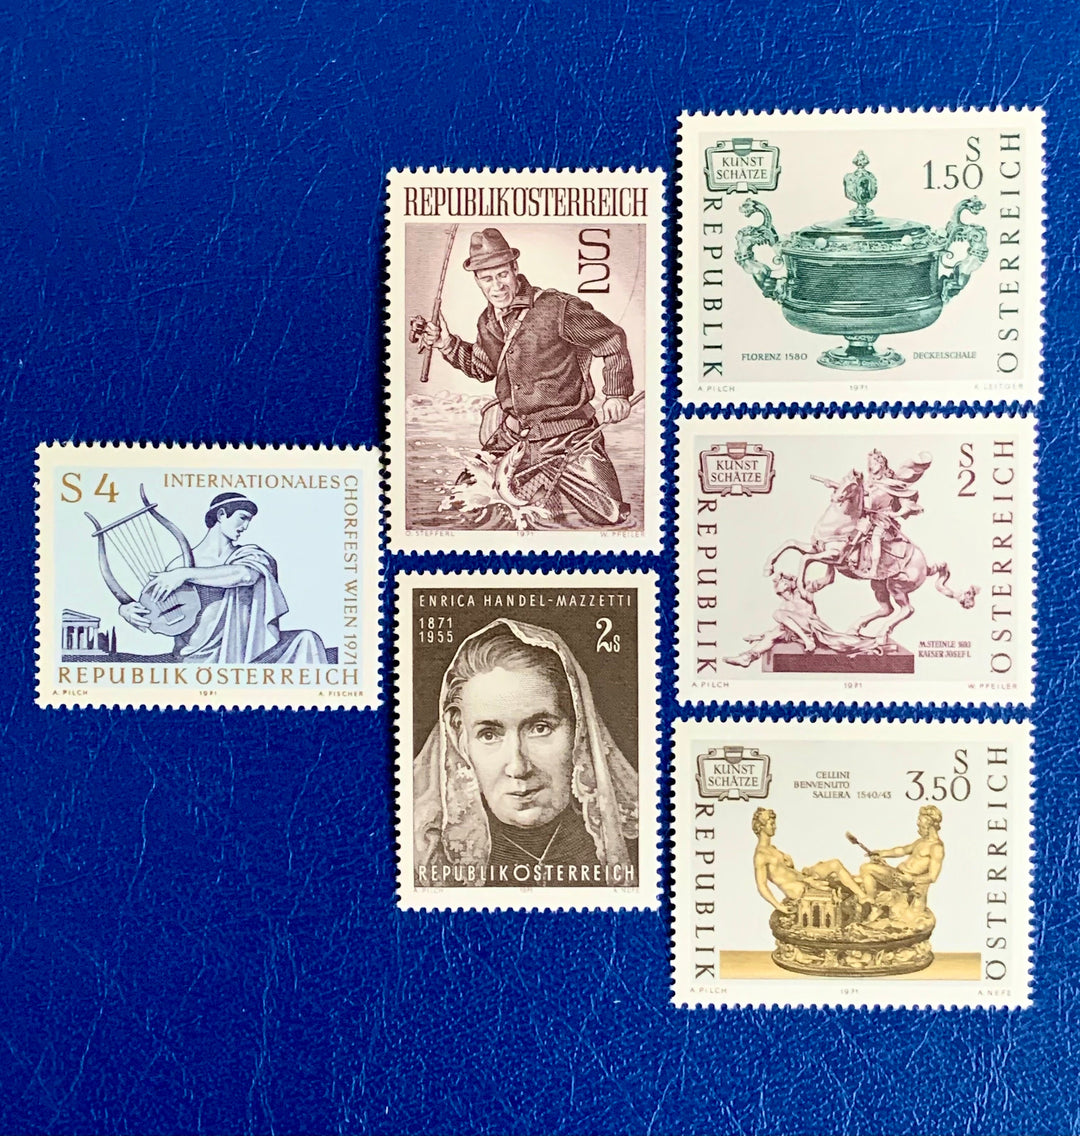 Austria - Original Vintage Postage Stamps - 1971 Mix - for the collector, artist or crafter - scrapbooks, decoupage, journals